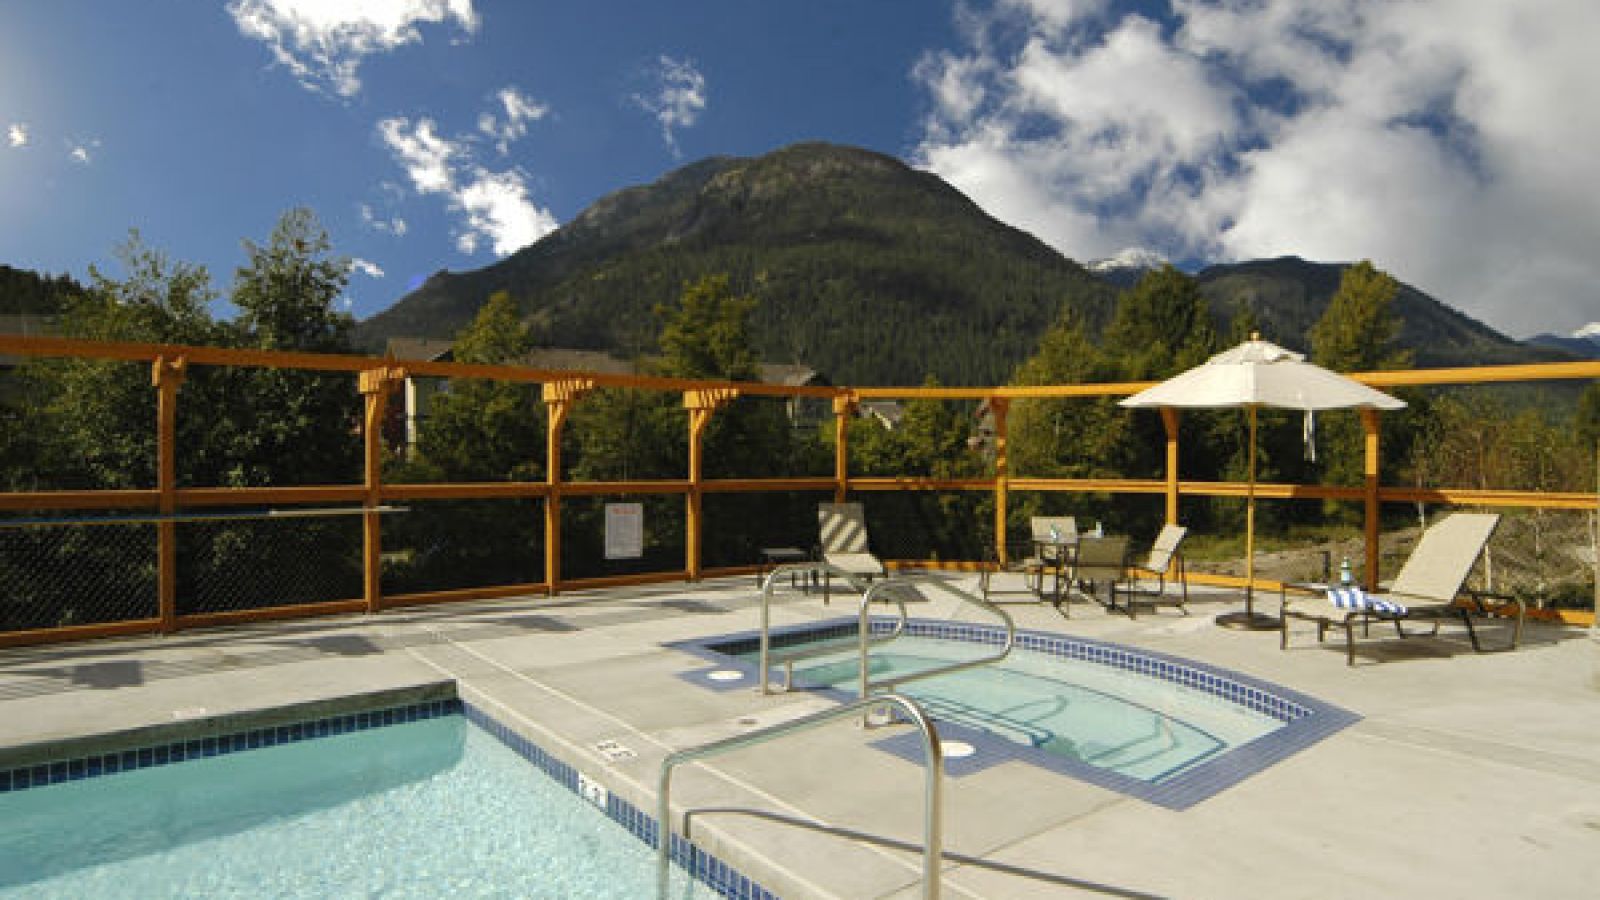 Pemberton Valley Lodge - patio and pool area